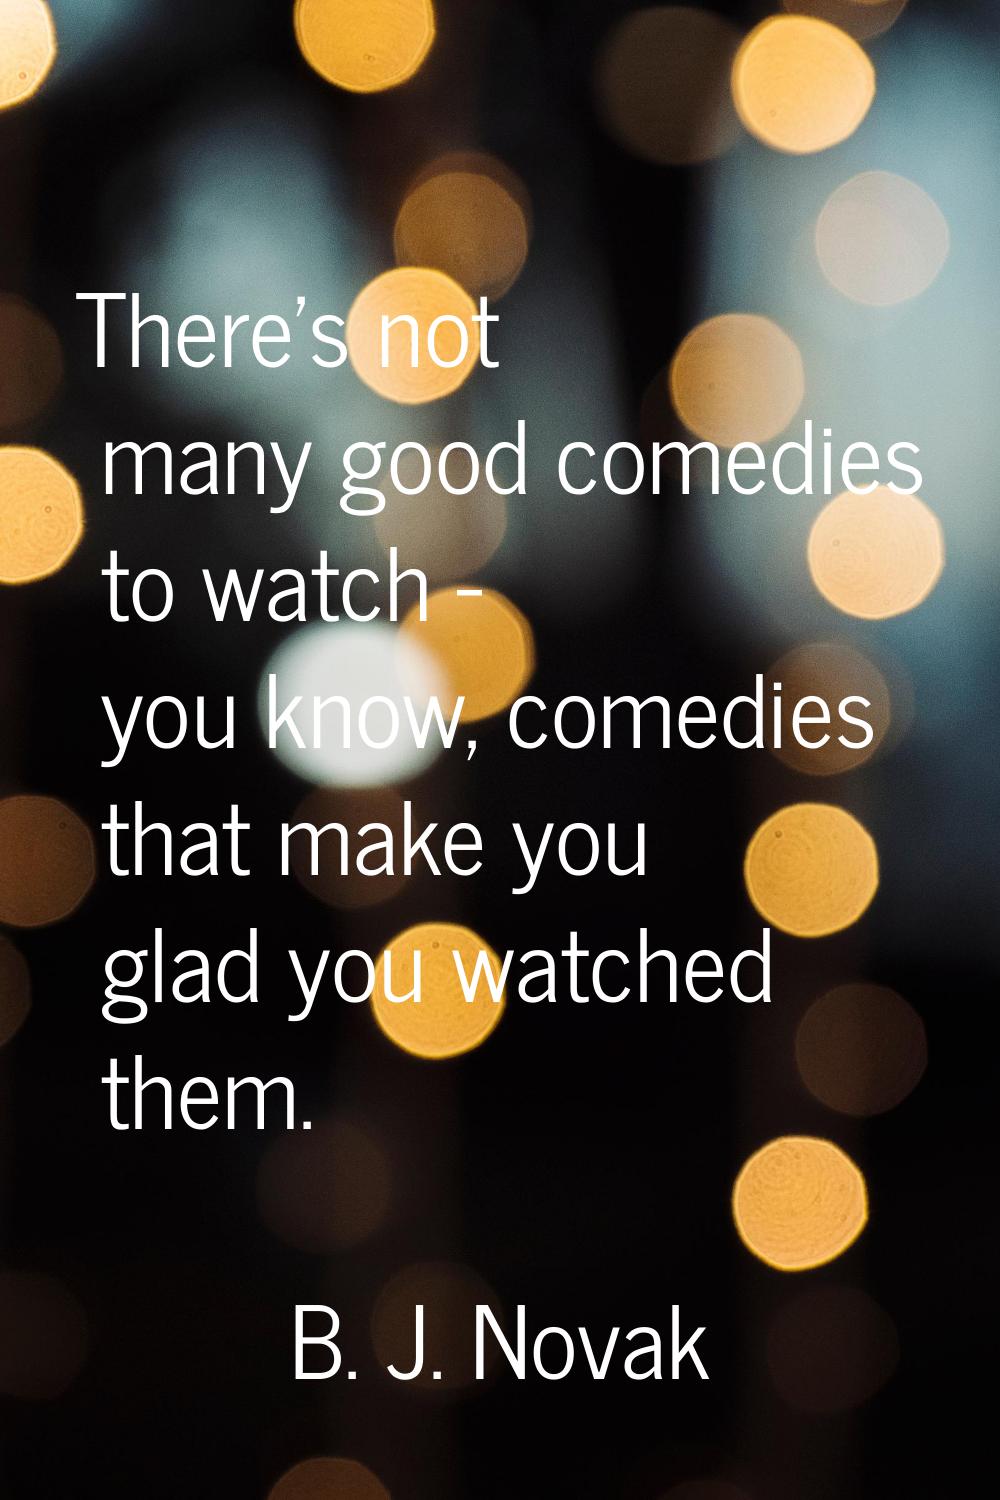 There's not many good comedies to watch - you know, comedies that make you glad you watched them.